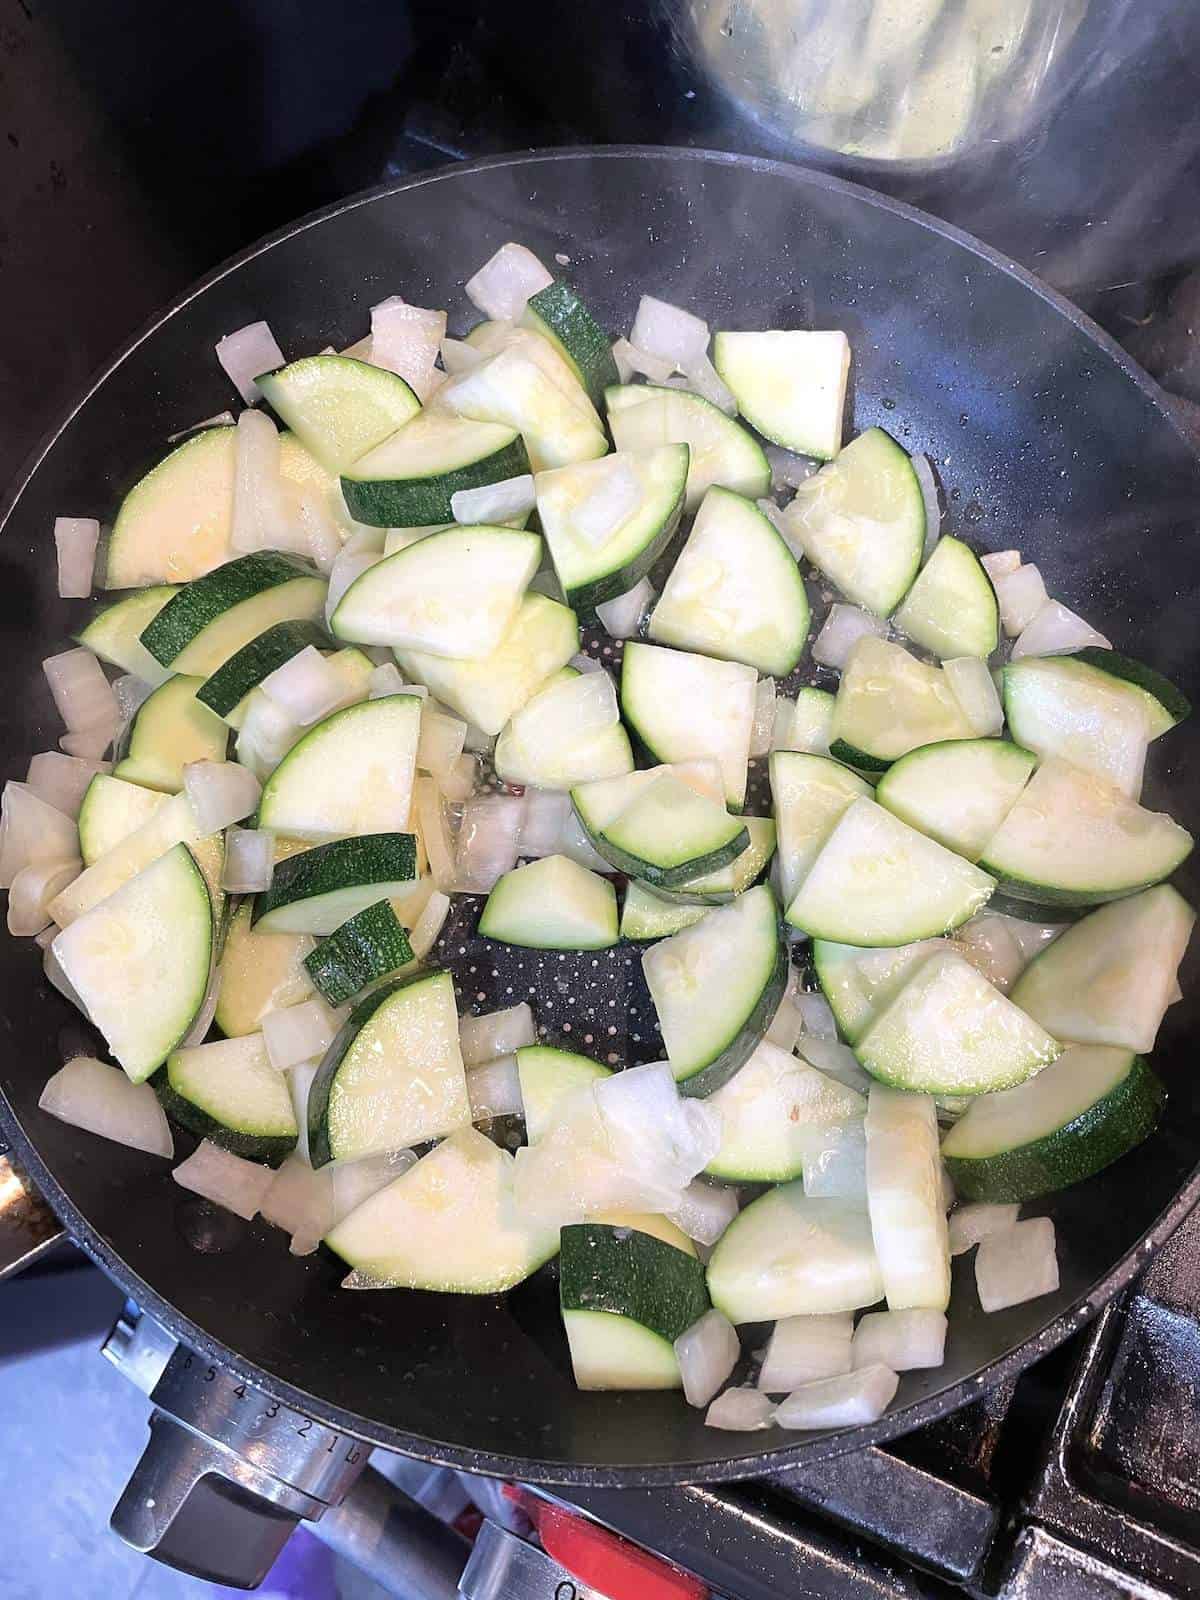 A frying pan with sautéed zucchini and onions cooking in it.